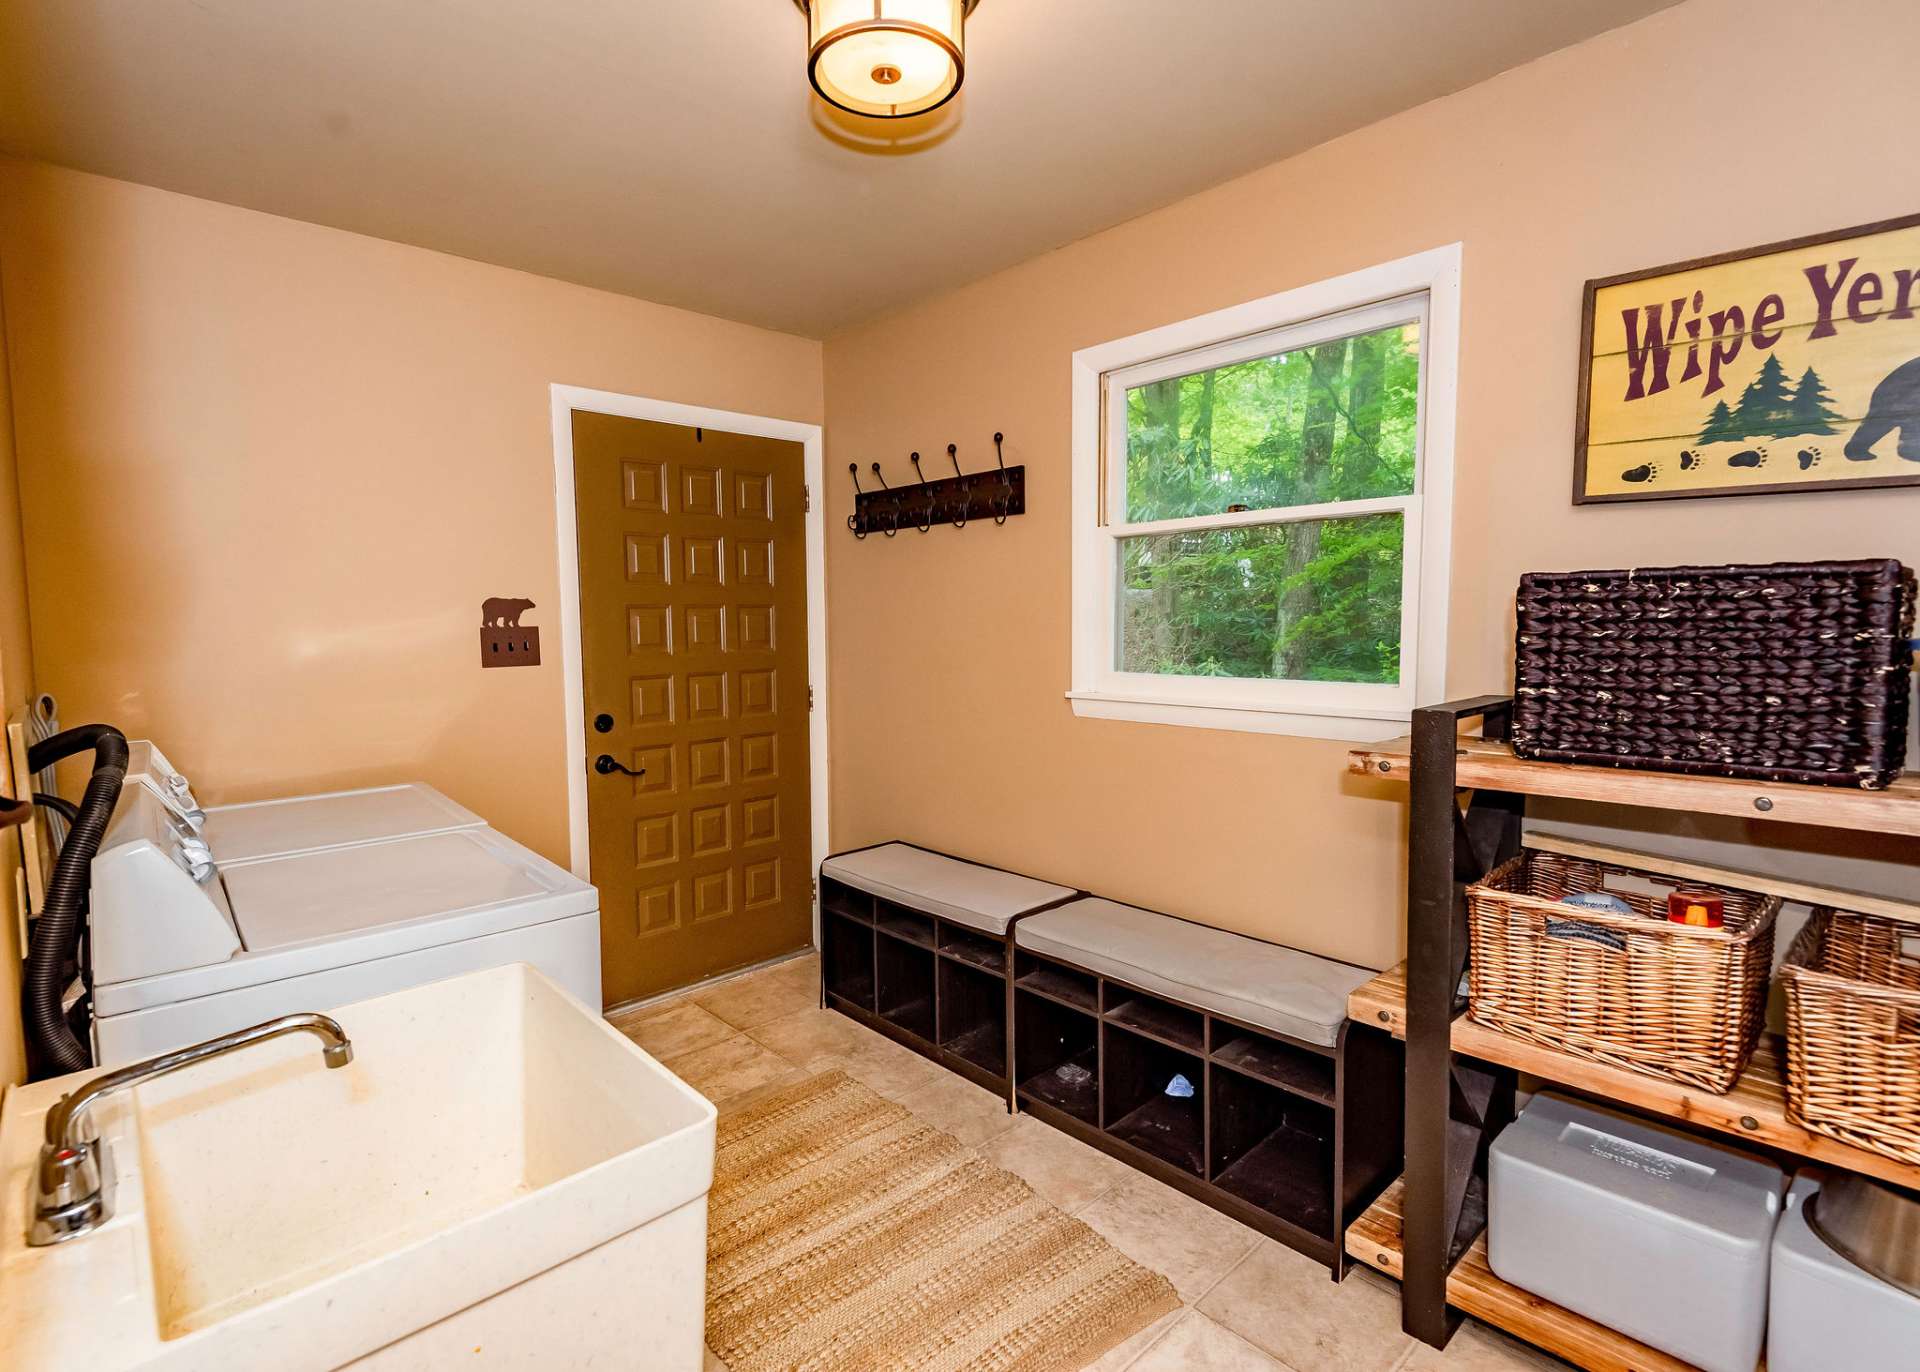 A mud room and laundry room combination can be accessed from the outdoors or kitchen area.